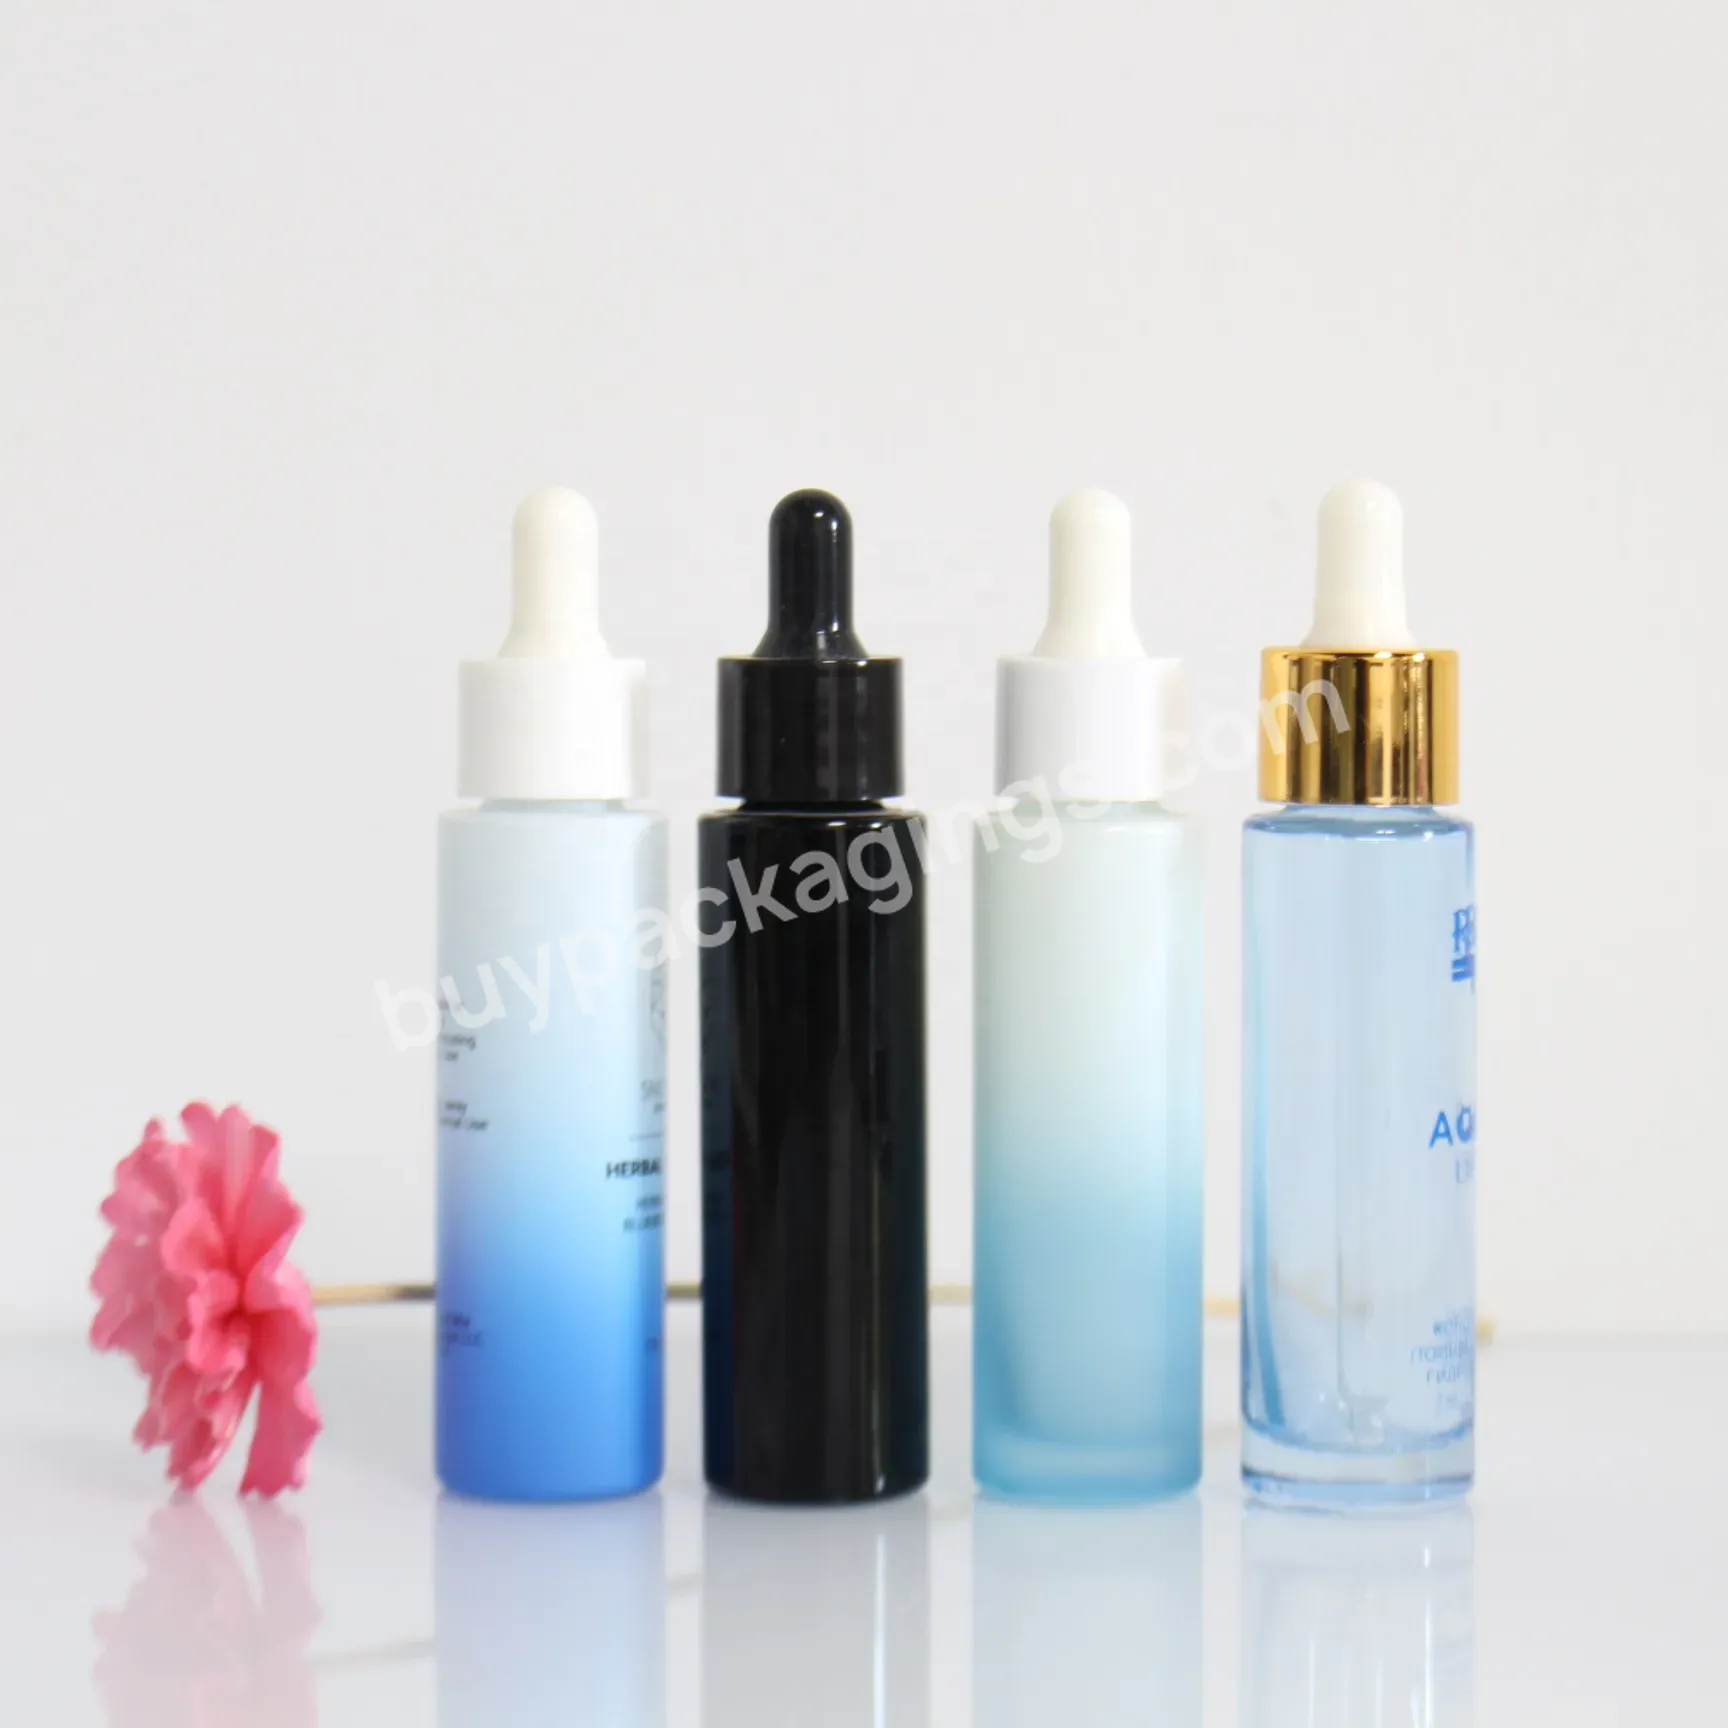 Hot Discounts Products 20ml 30ml 40ml 60ml Empty Clear Turn Lock Pump Airless Liquid Foundation Packaging Glass Bottle - Buy Foundation Packaging Bottle,Cream Lotion Glass Bottle With Press Pump Cap,20ml 30ml 40ml 60ml Liquid Foundation Bottle With Pump.